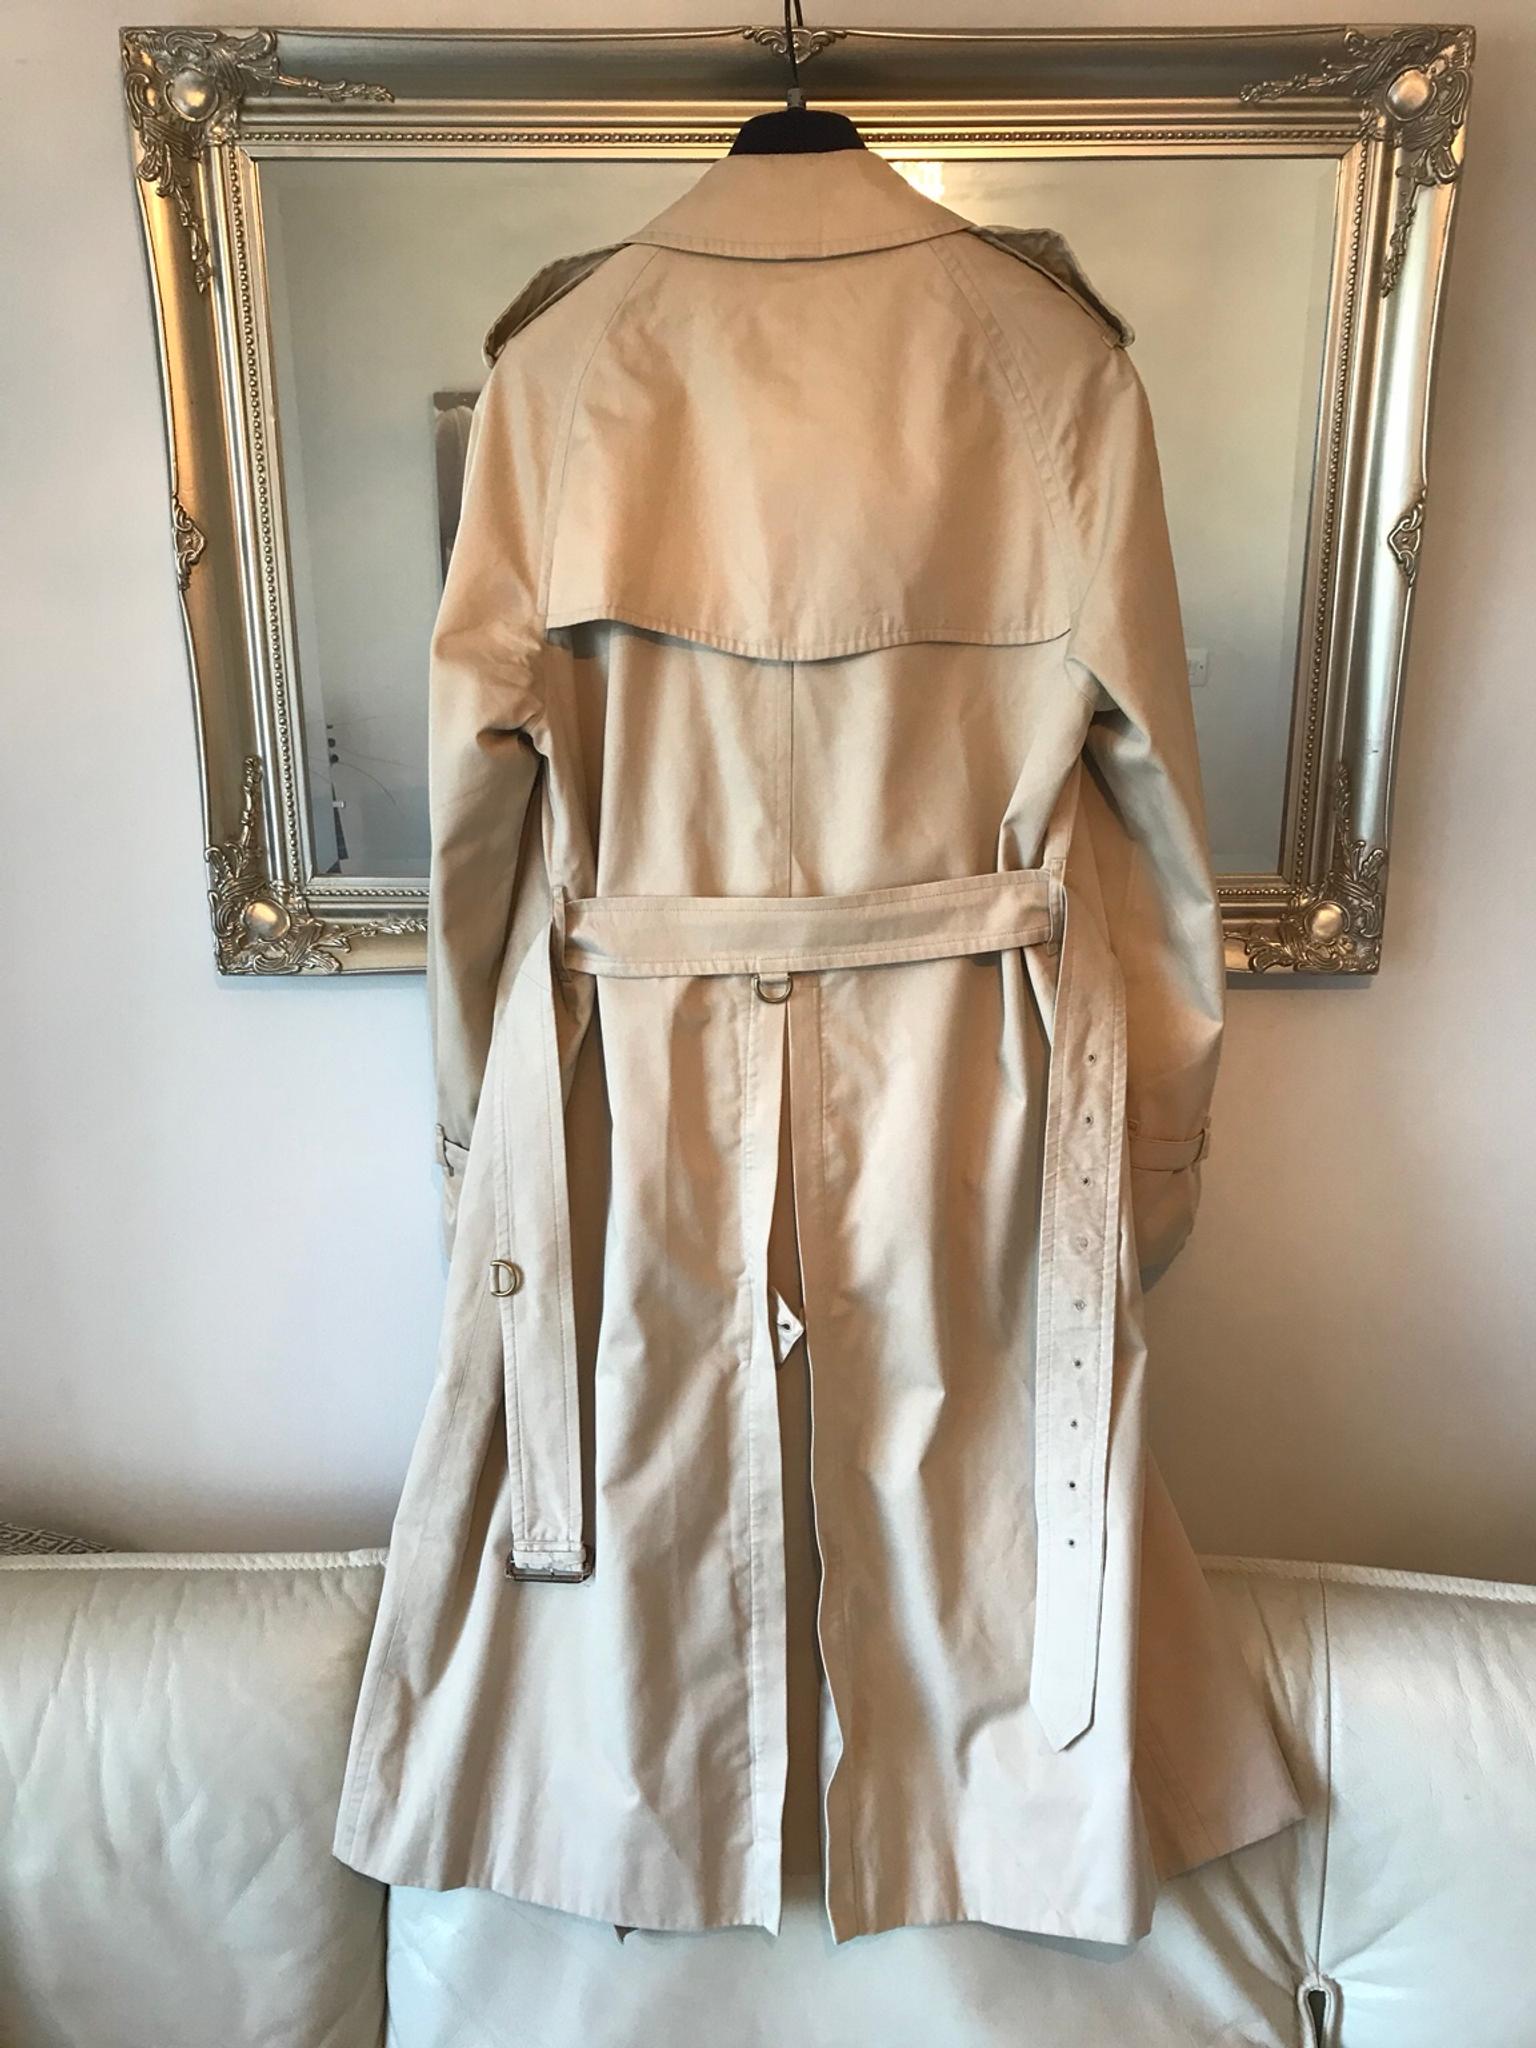 ORIGINAL 80's Vintage BURBERRY Trench Coat in TS18-Tees for £130.00 for  sale | Shpock